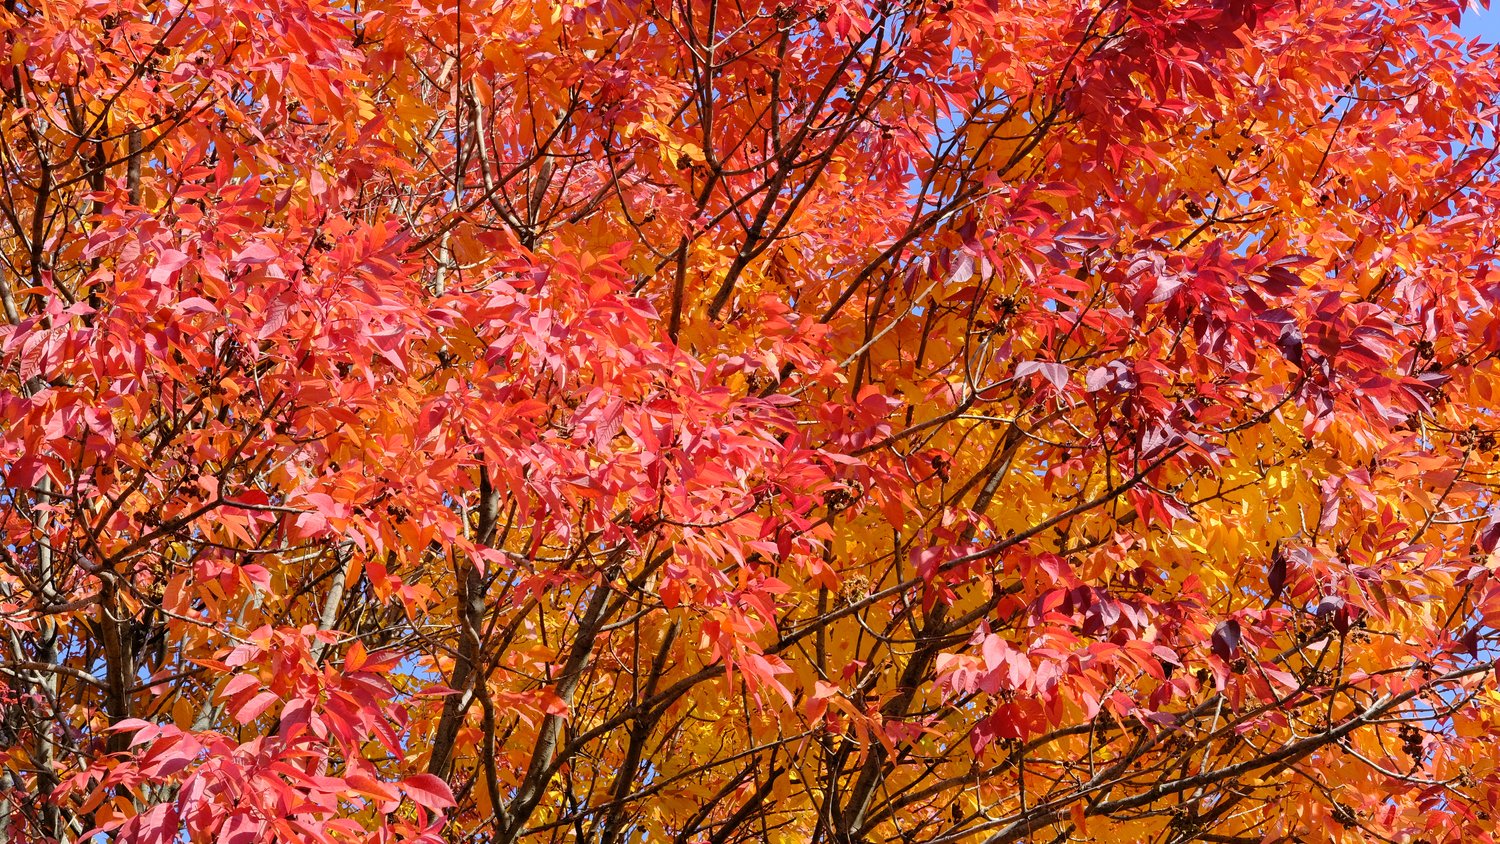 Bright red and orange leaves.